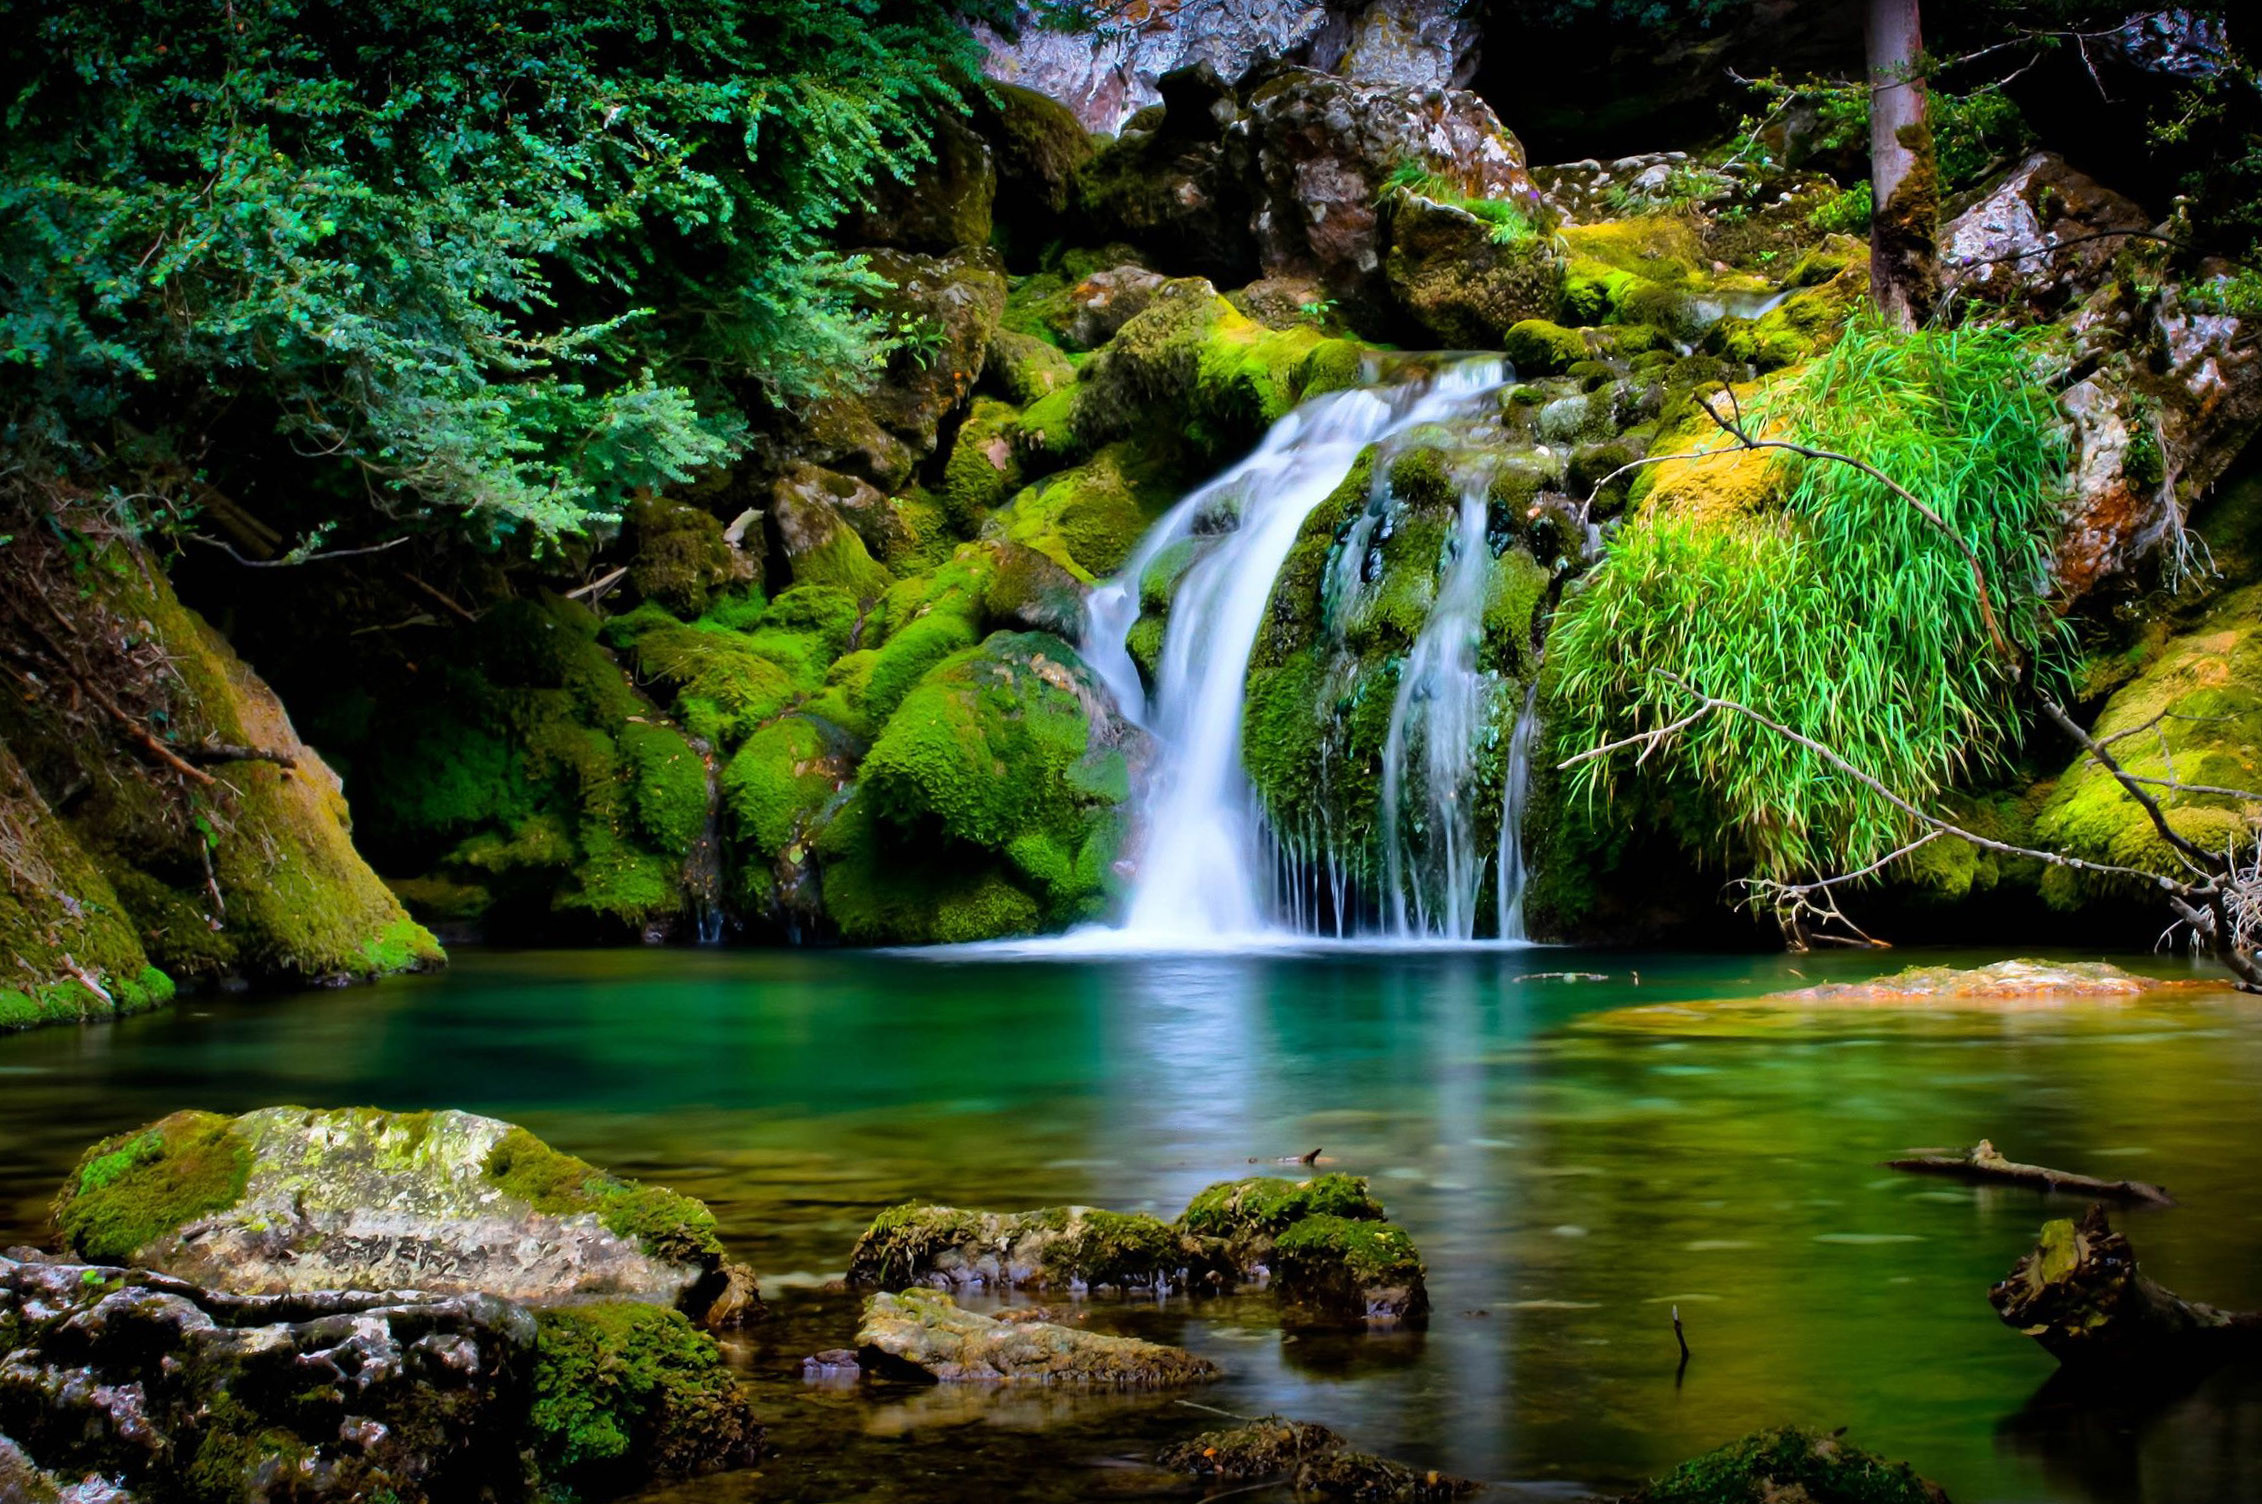 hd natural wallpaper,body of water,waterfall,water resources,natural landscape,nature